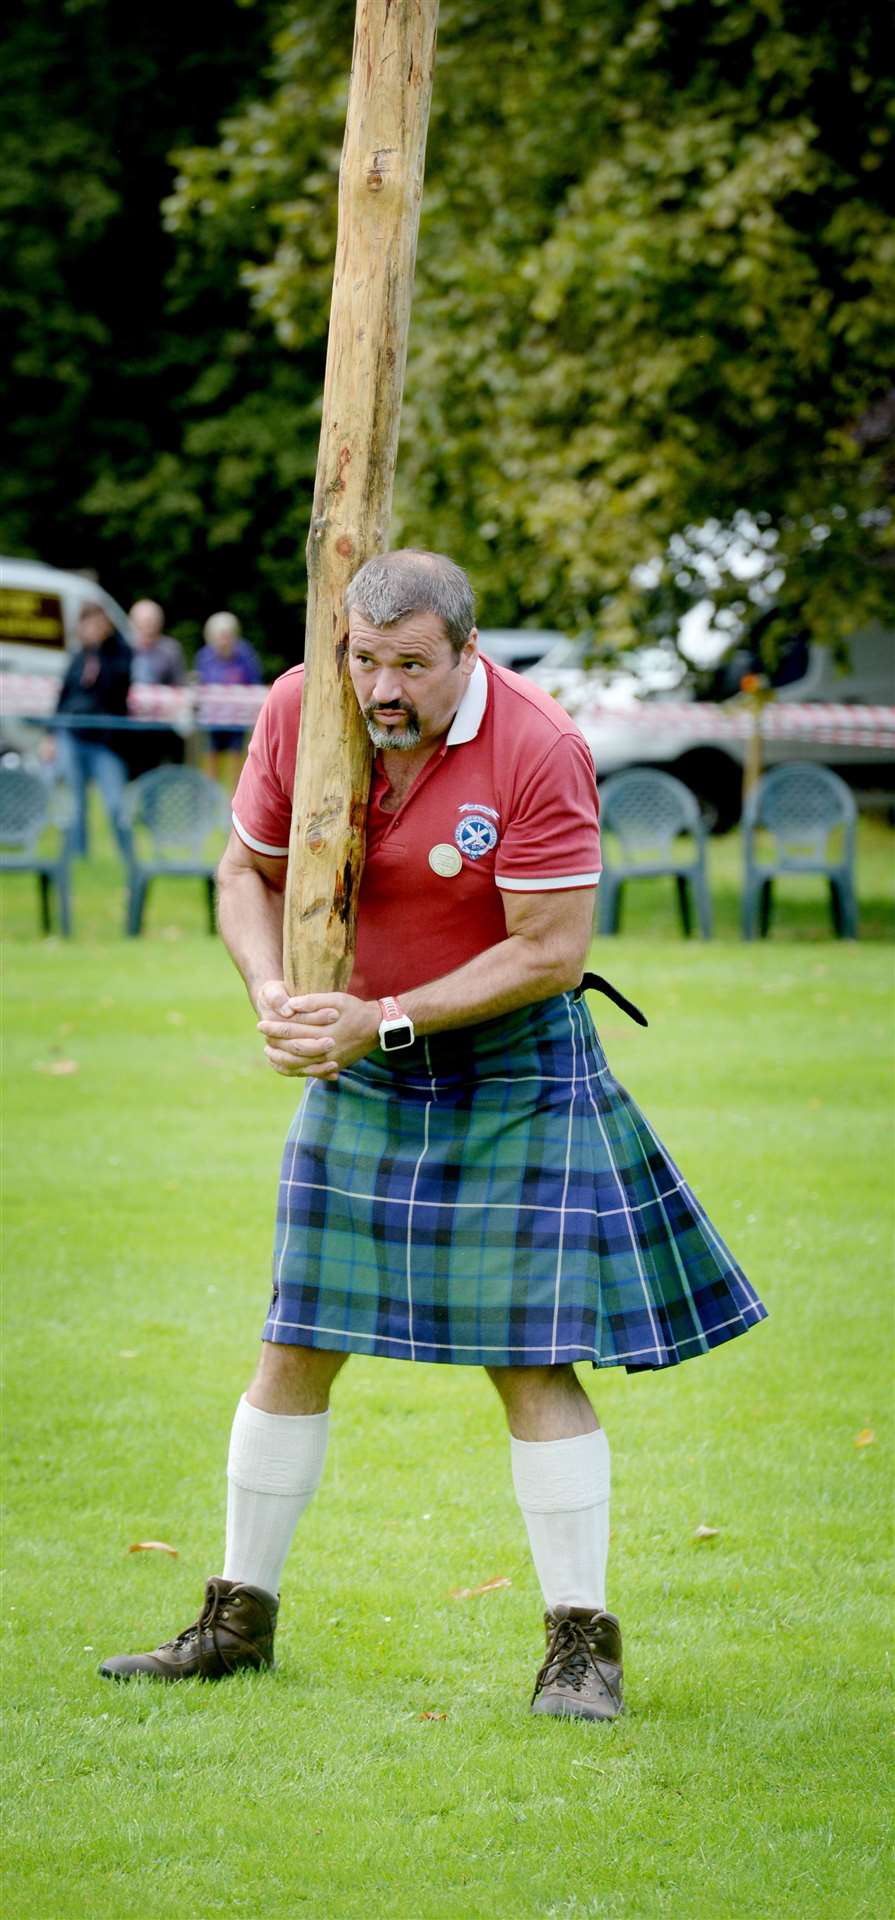 Malcolm Cleghorn gave a caber tossing demonstration at the event in 2017. Picture: Gair Fraser.